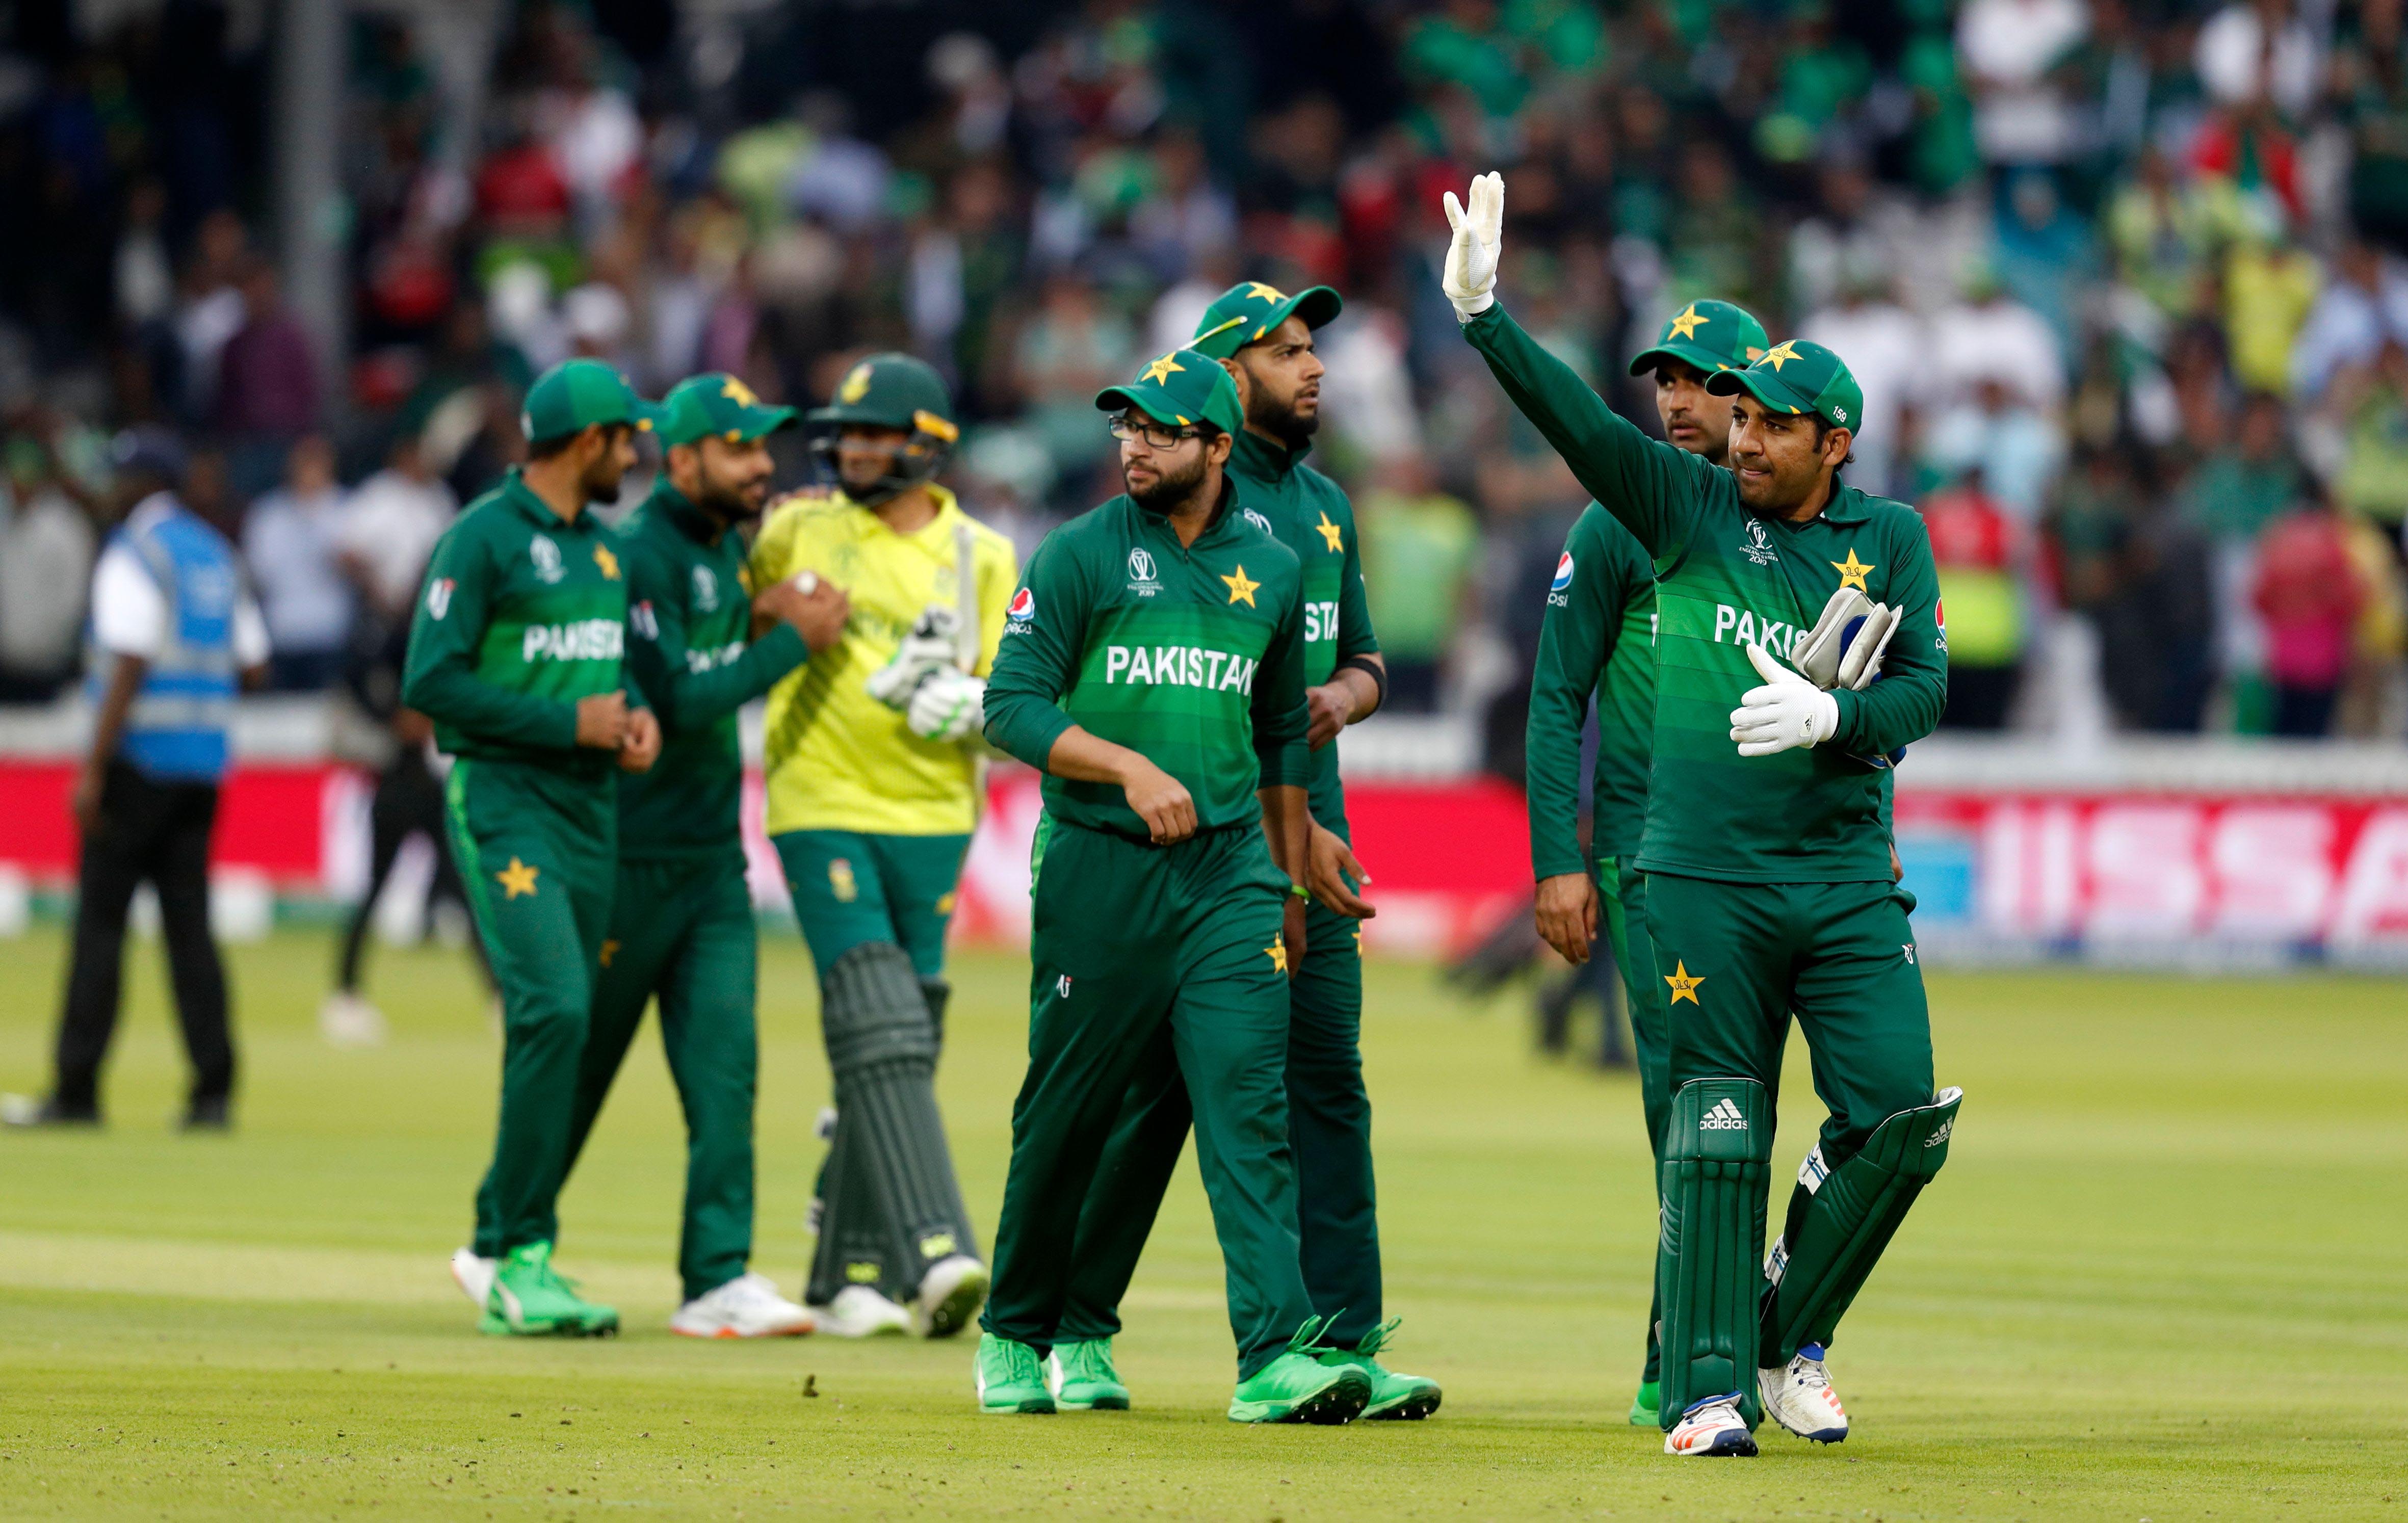 Pakistan Vs South Africa Live Cricket Score Pak Vs Sa In Pictures At World Cup 2019 Live